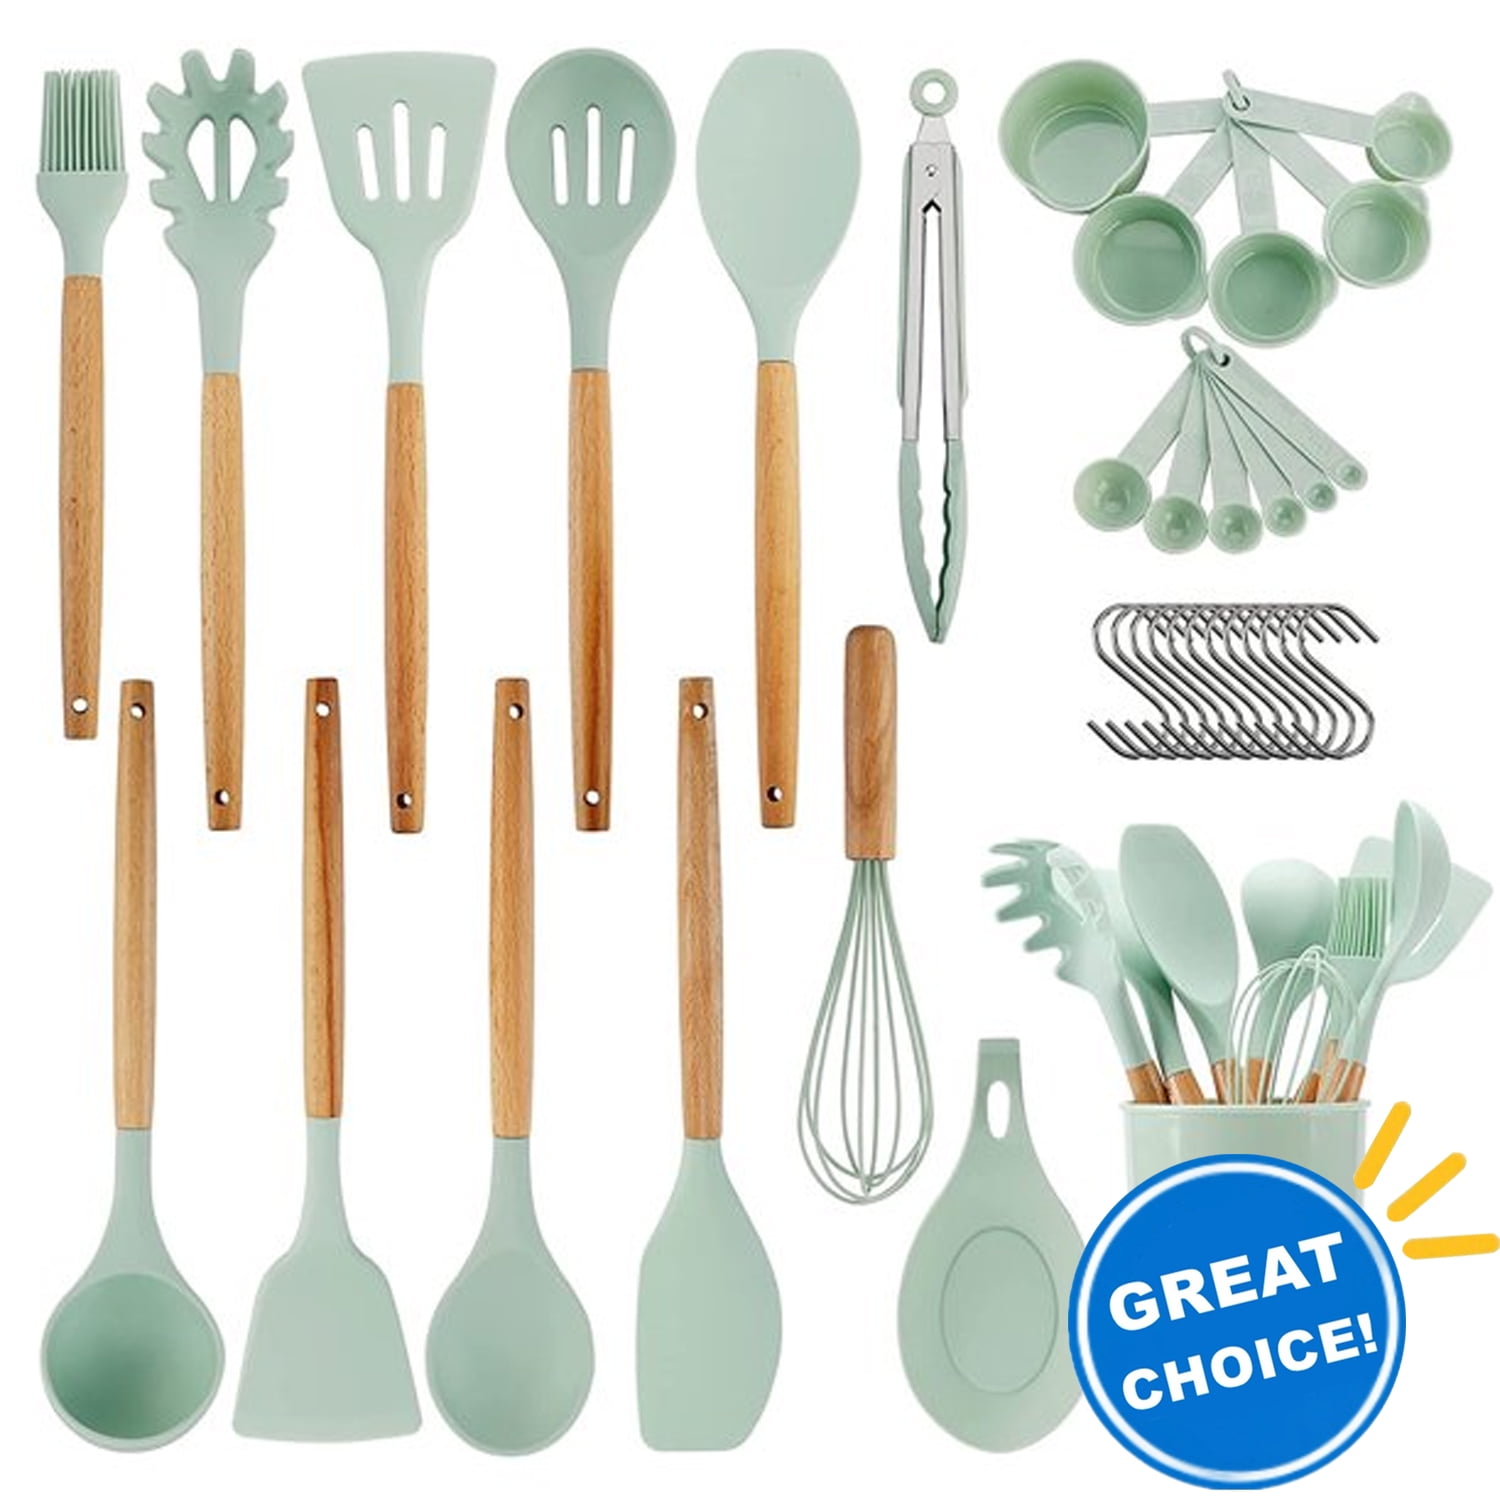 Silicone Cooking Utensils Set - 446°F Heat Resistant Silicone Kitchen  Utensils for Cooking,Kitchen Utensil Spatula Set w Wooden Handles and Holder,  BPA FREE Gadgets for Non-Stick Cookware (White) 